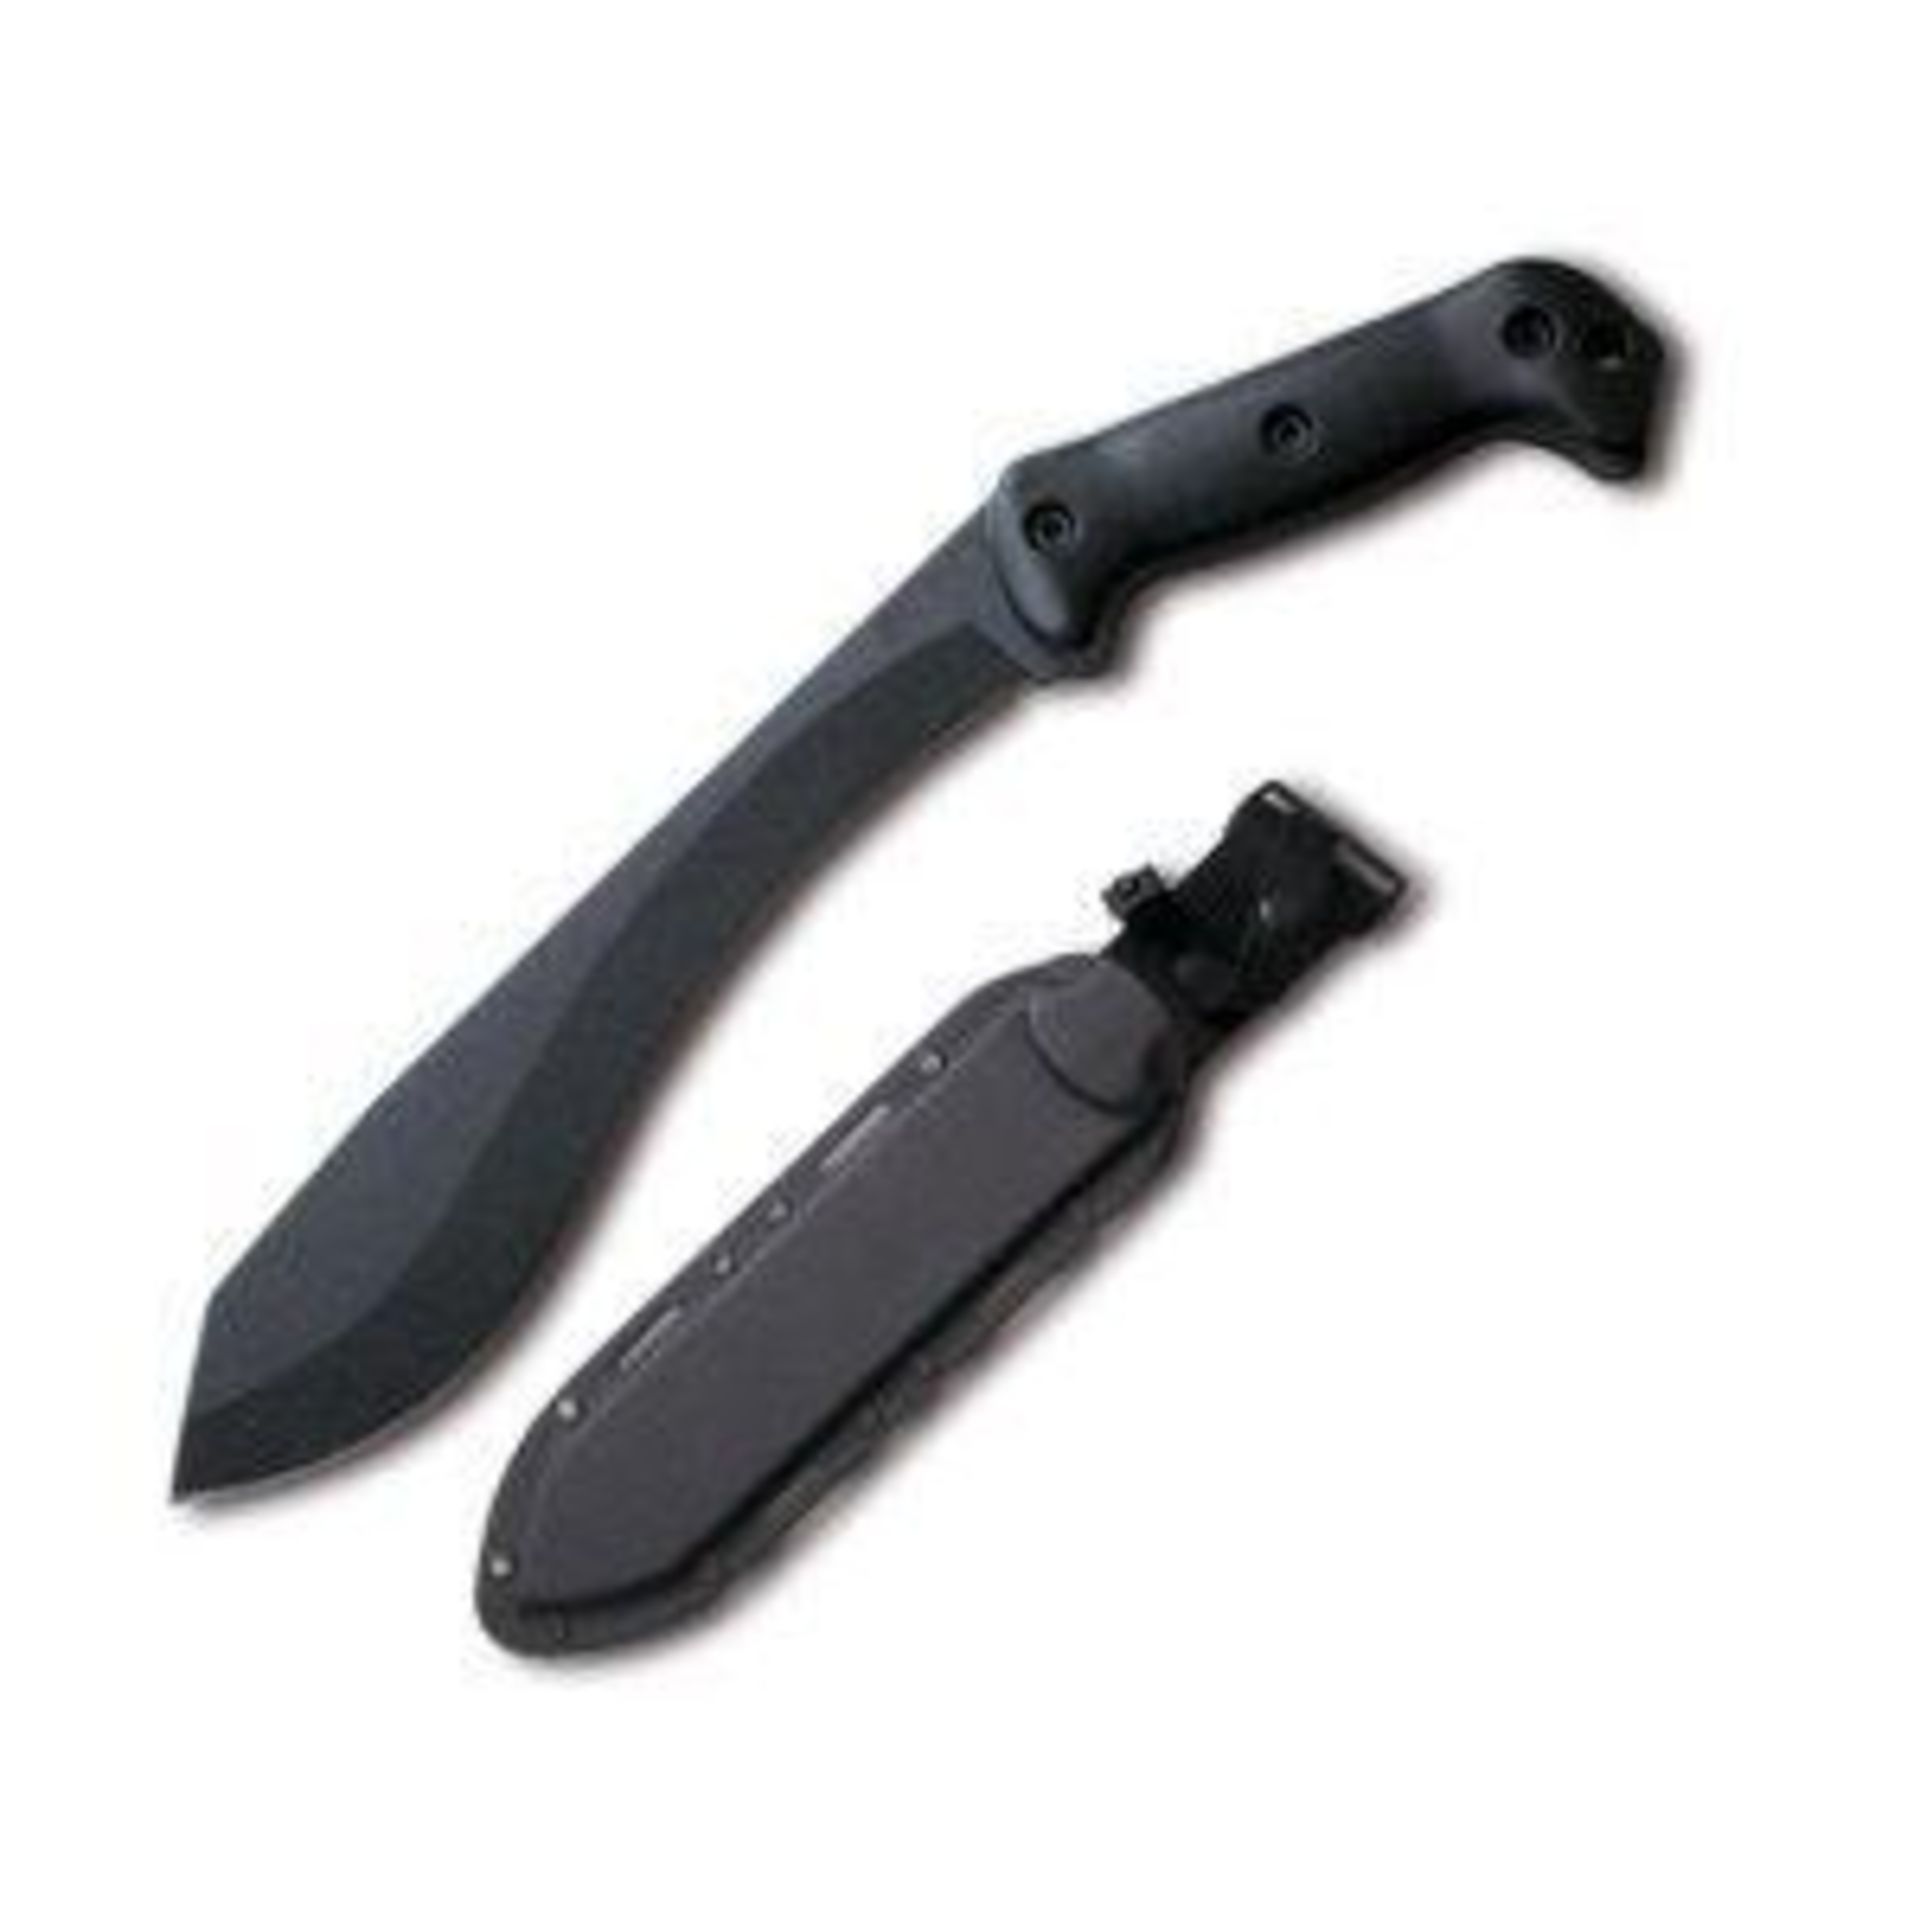 The Becker Tac Machax features a 9 3/8 in. fixed black blade made from 1095 Cro-van steel with a